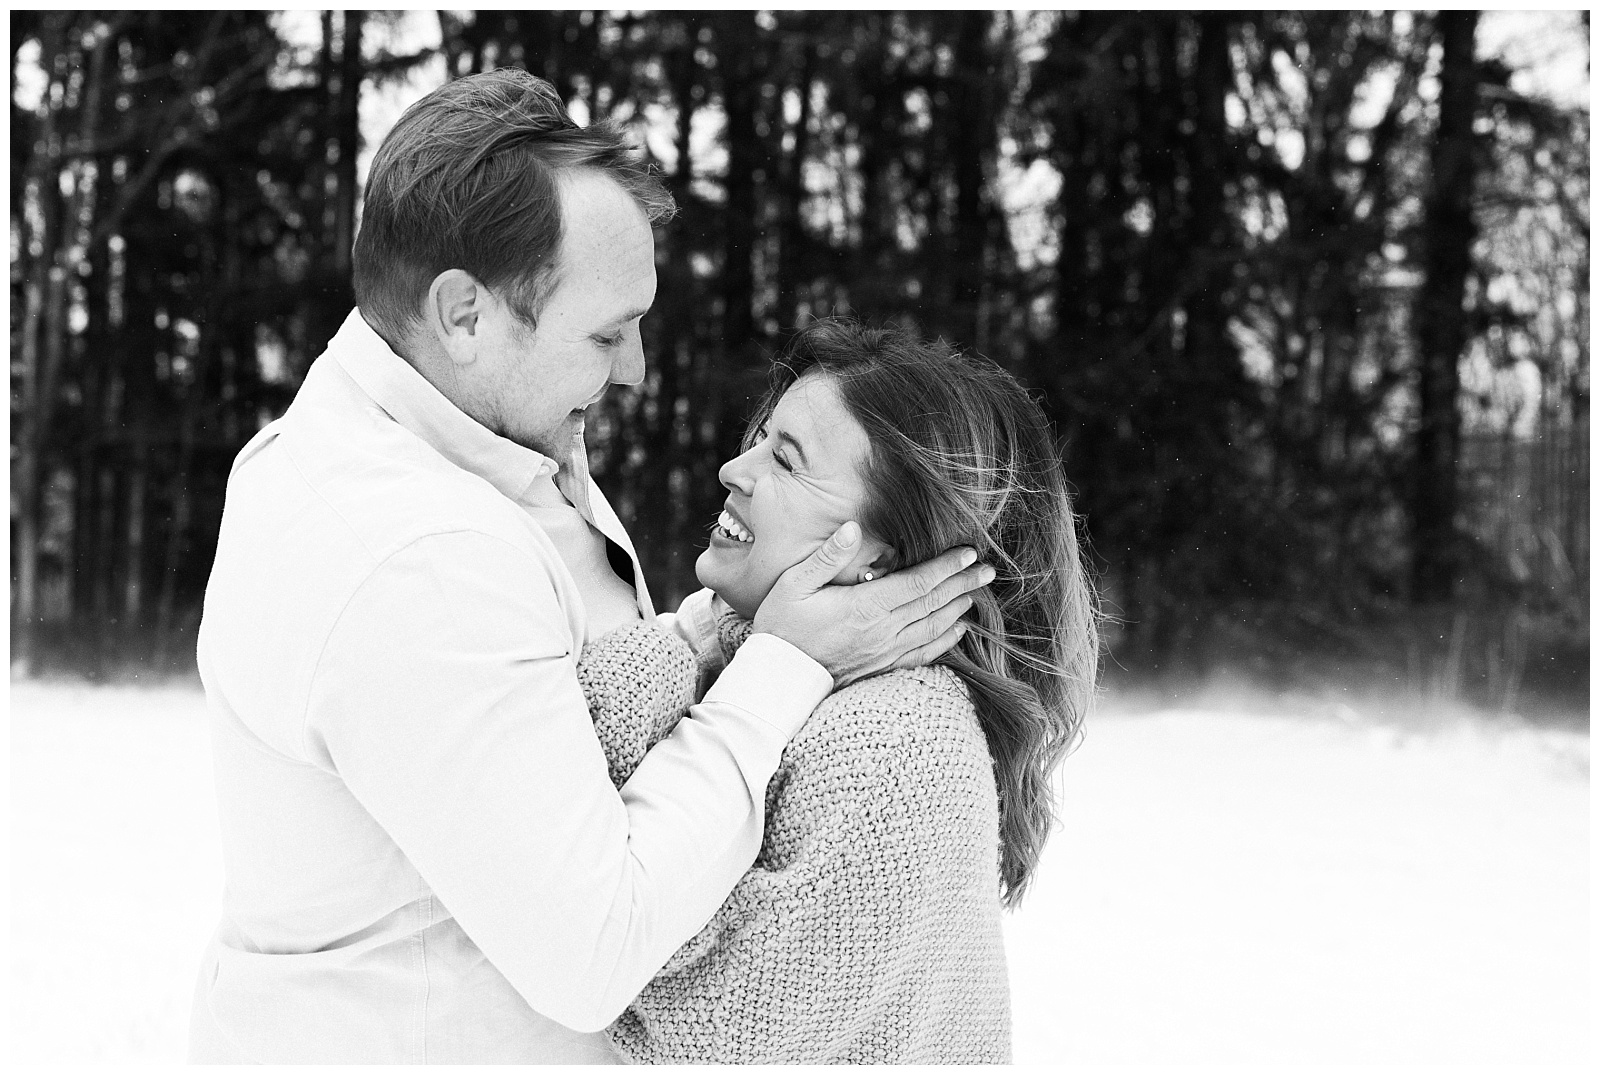 New Jersey Engagement Session, Snowy, Winter, Cozy, Session, Wedding Photographer, Cross Estate Gardens, Snow, Wintry, Black and White